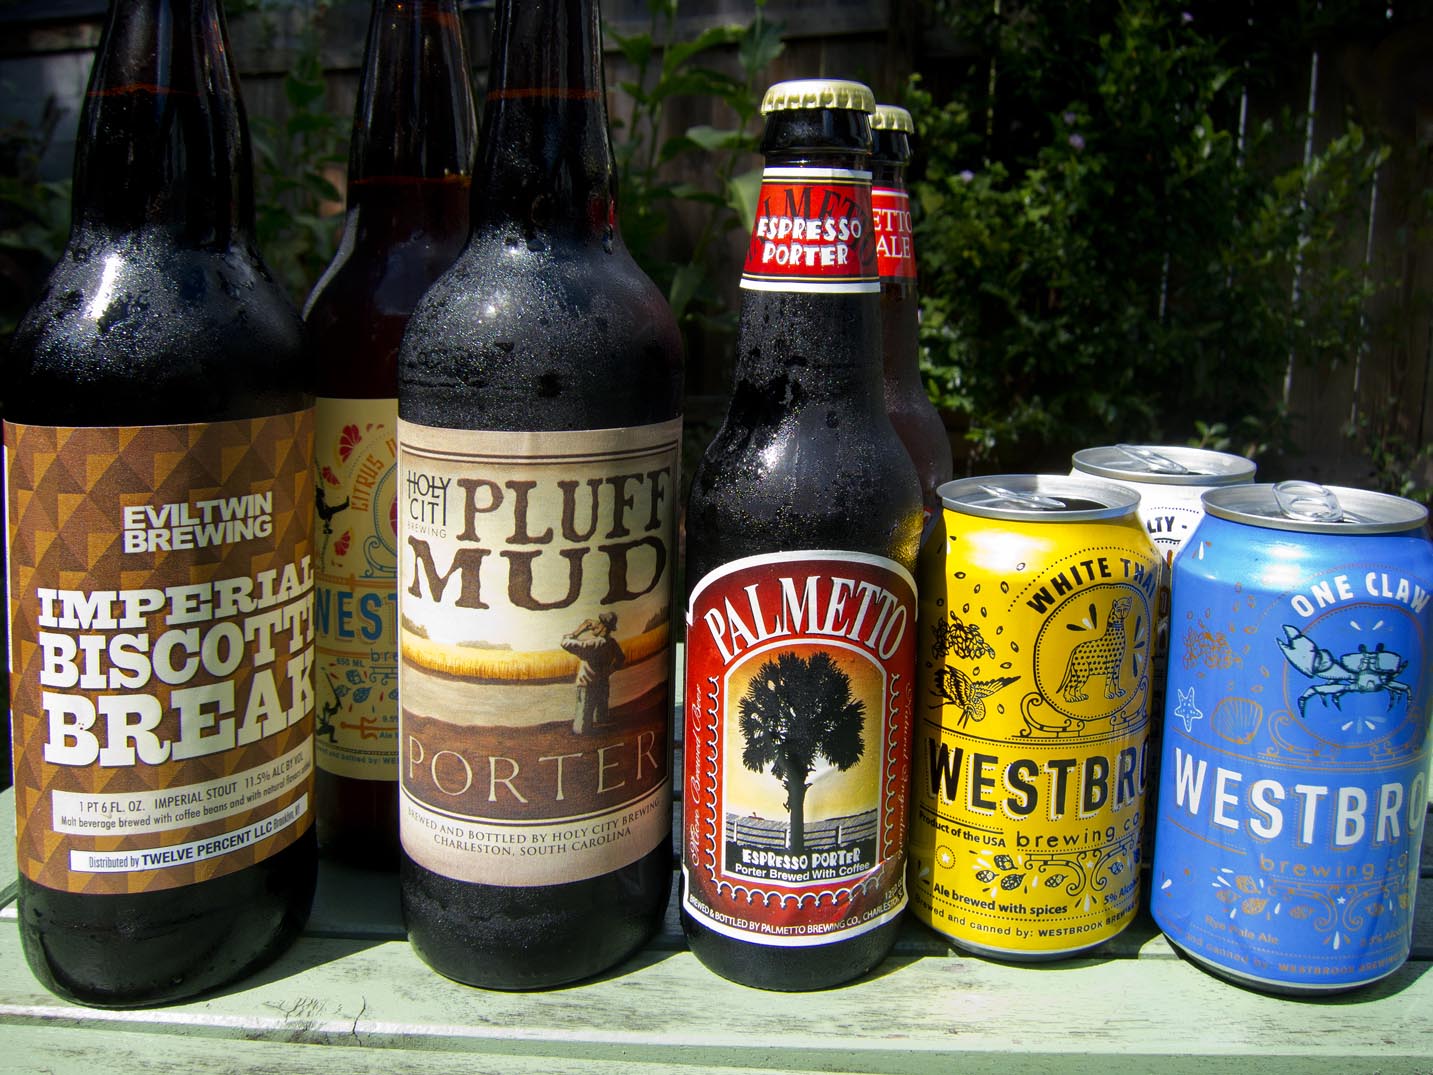 Bottles of local beer from Charleston, South Carolina